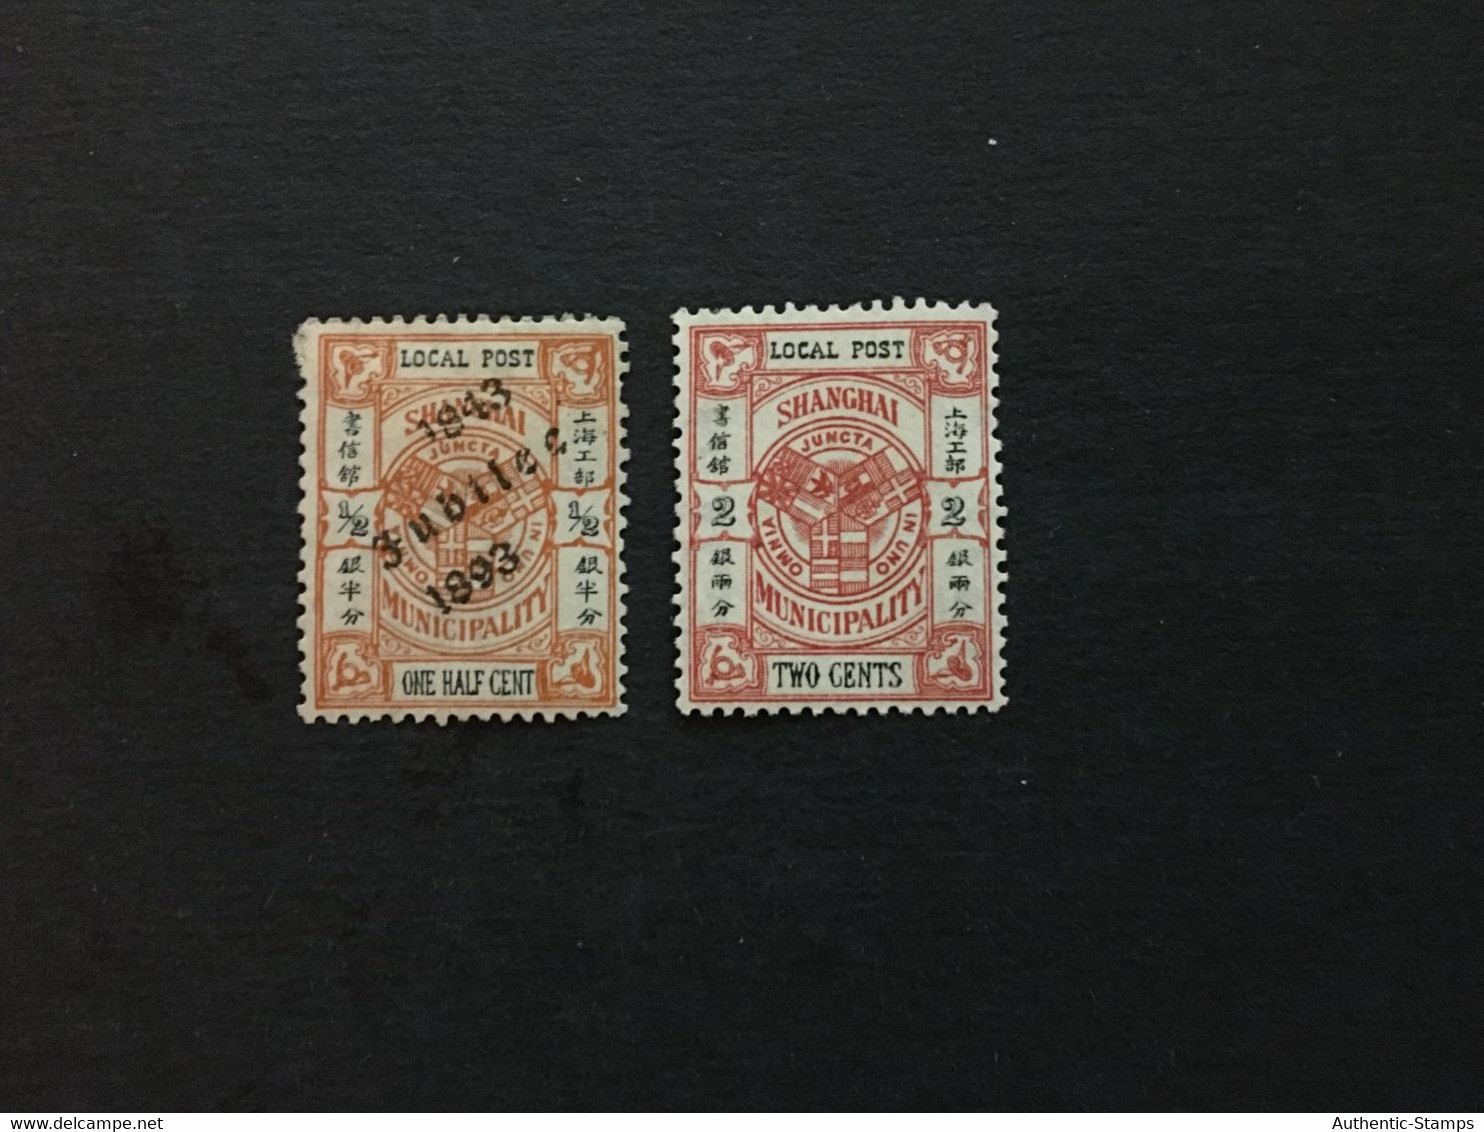 CHINA  STAMP, Imperial Local, Shanghai, TIMBRO, STEMPEL, UnUSED,  CINA, CHINE, LIST 2027 - Oblitérés